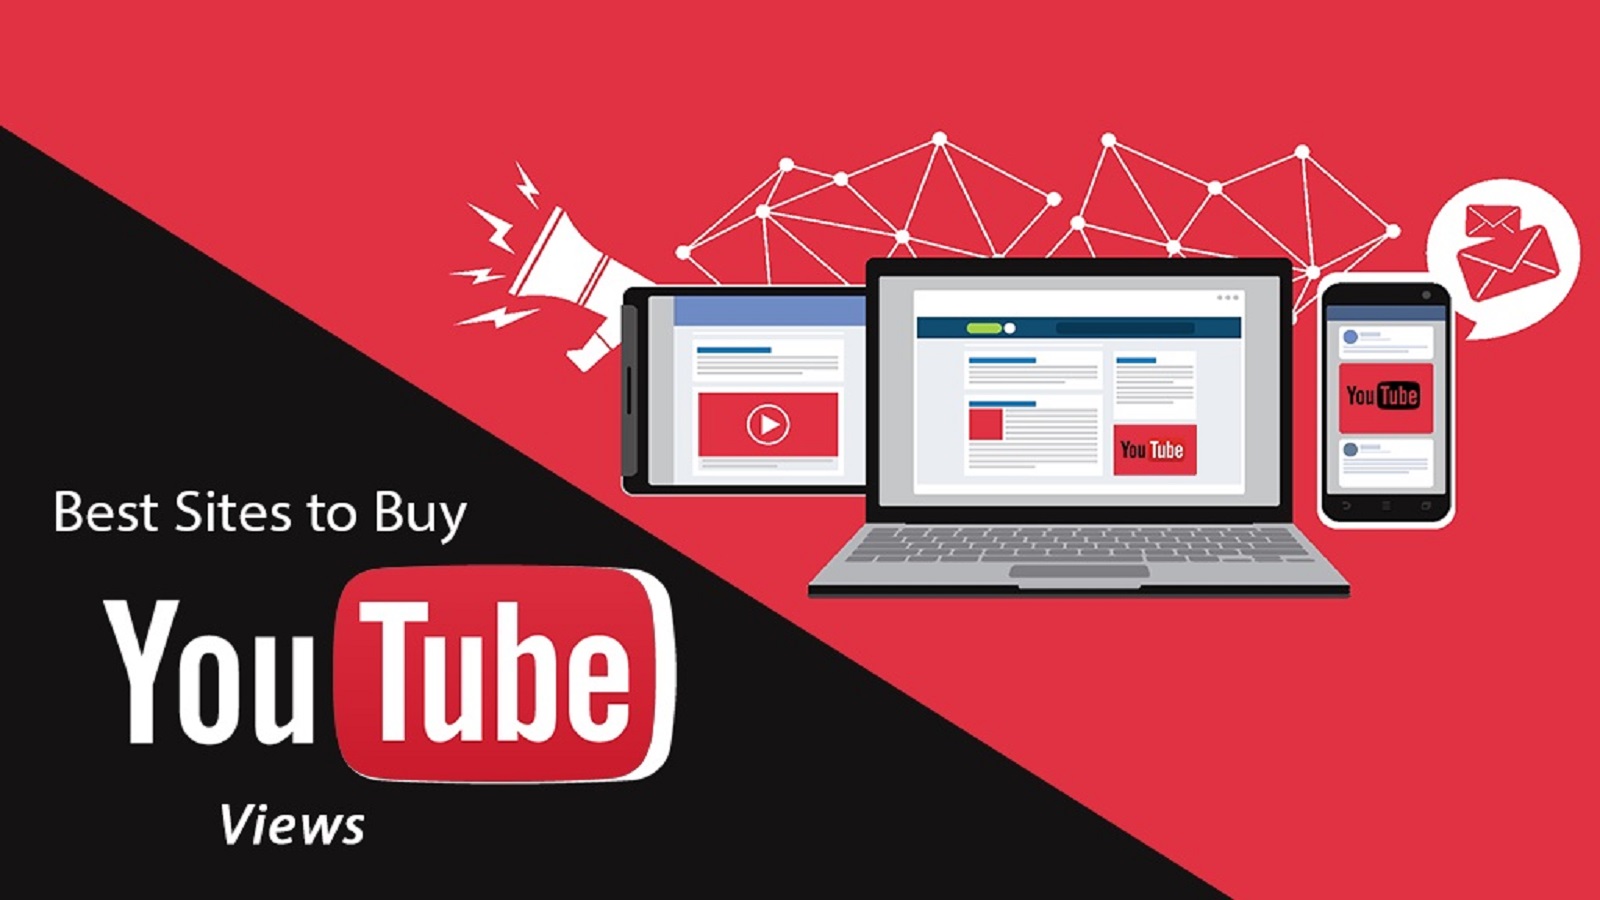 buy youtube views from usa, buy youtube views, buy youtube views USA, youtube views, USA views, youtube marketing, boost your reach, increase youtube views, USA youtube audience, youtube strategy, youtube promotion, organic views, genuine engagement, youtube algorithm, youtube ranking, youtube success, youtube growth, Buyyoutubeviews